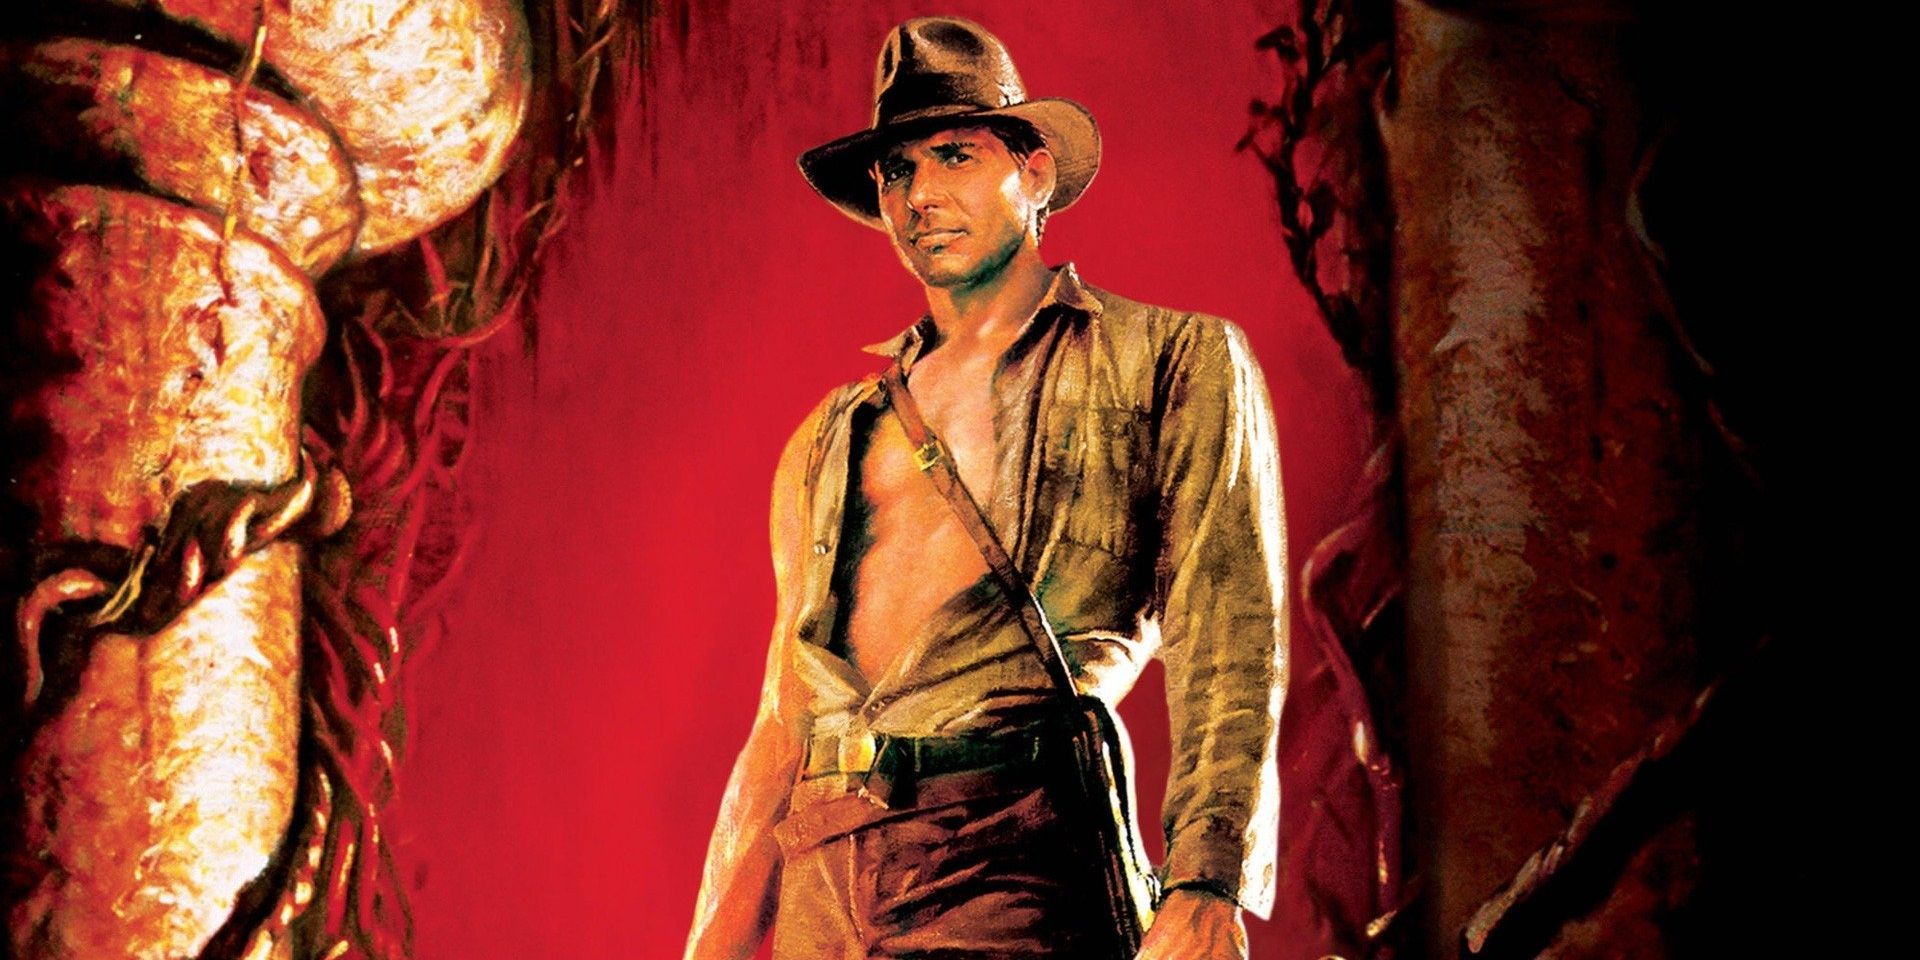 The poster for Indiana Jones and the Temple of Doom